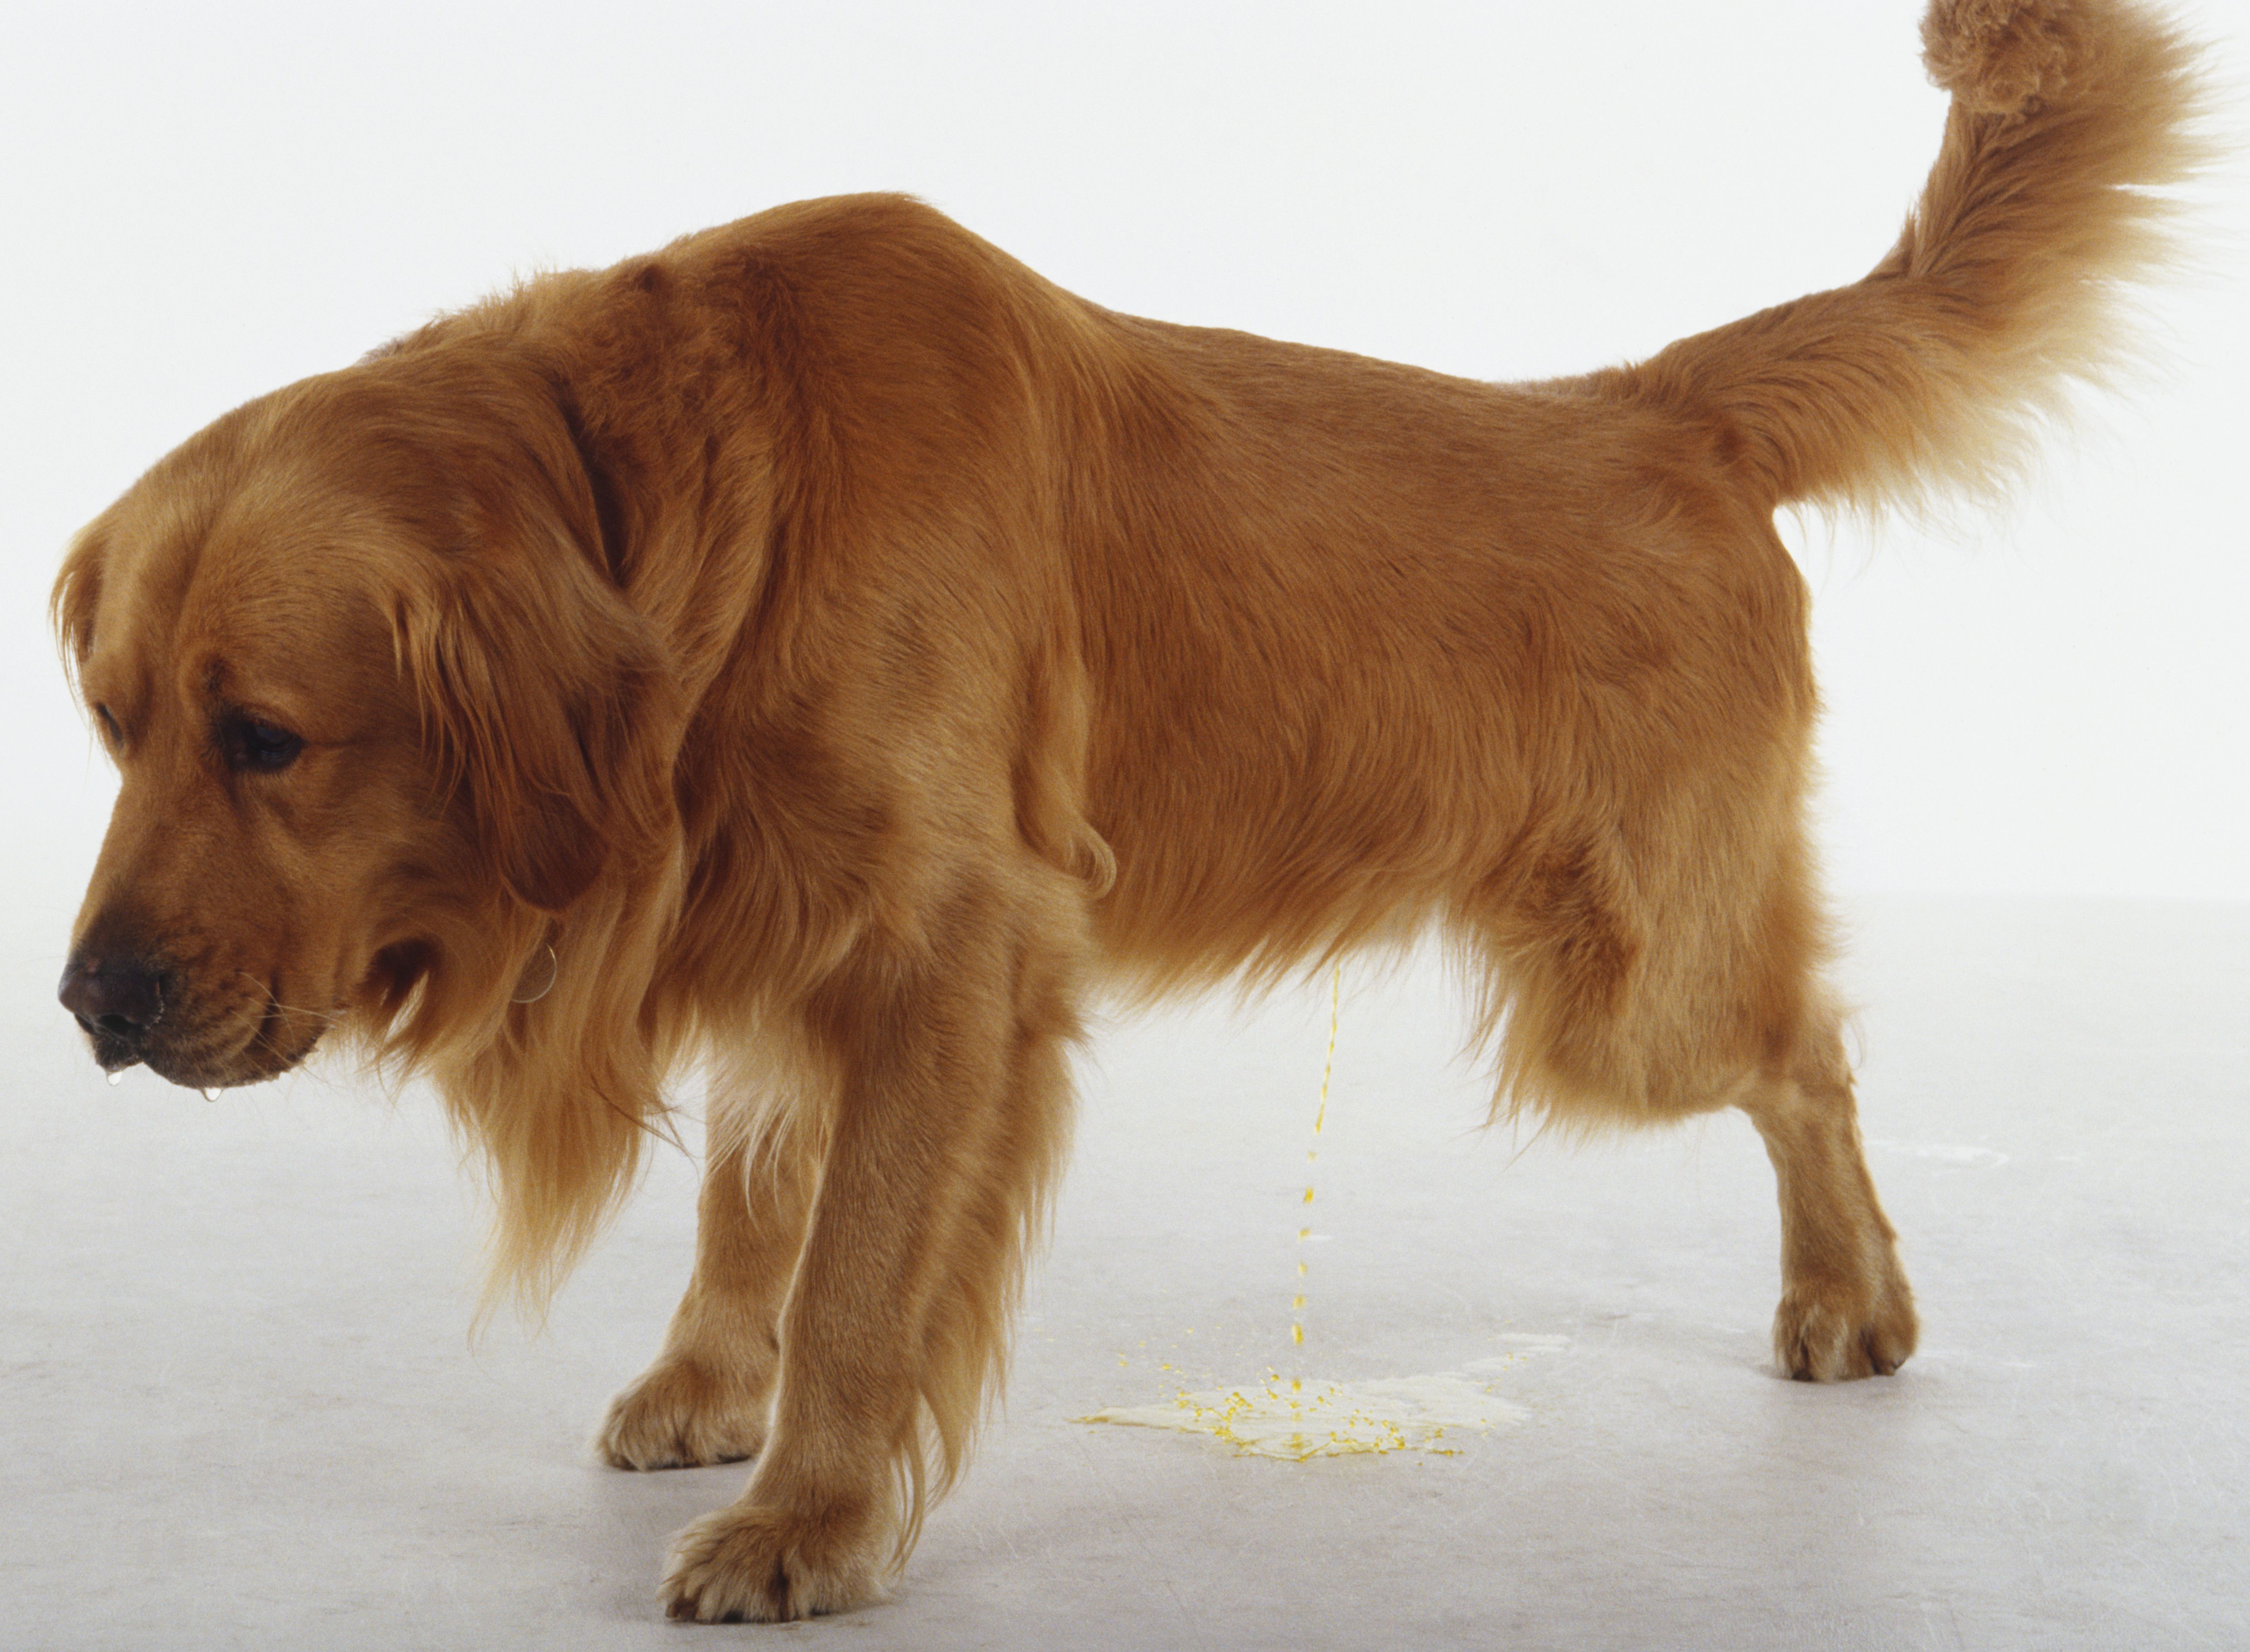 Signs of Common Urinary Problems in Dogs